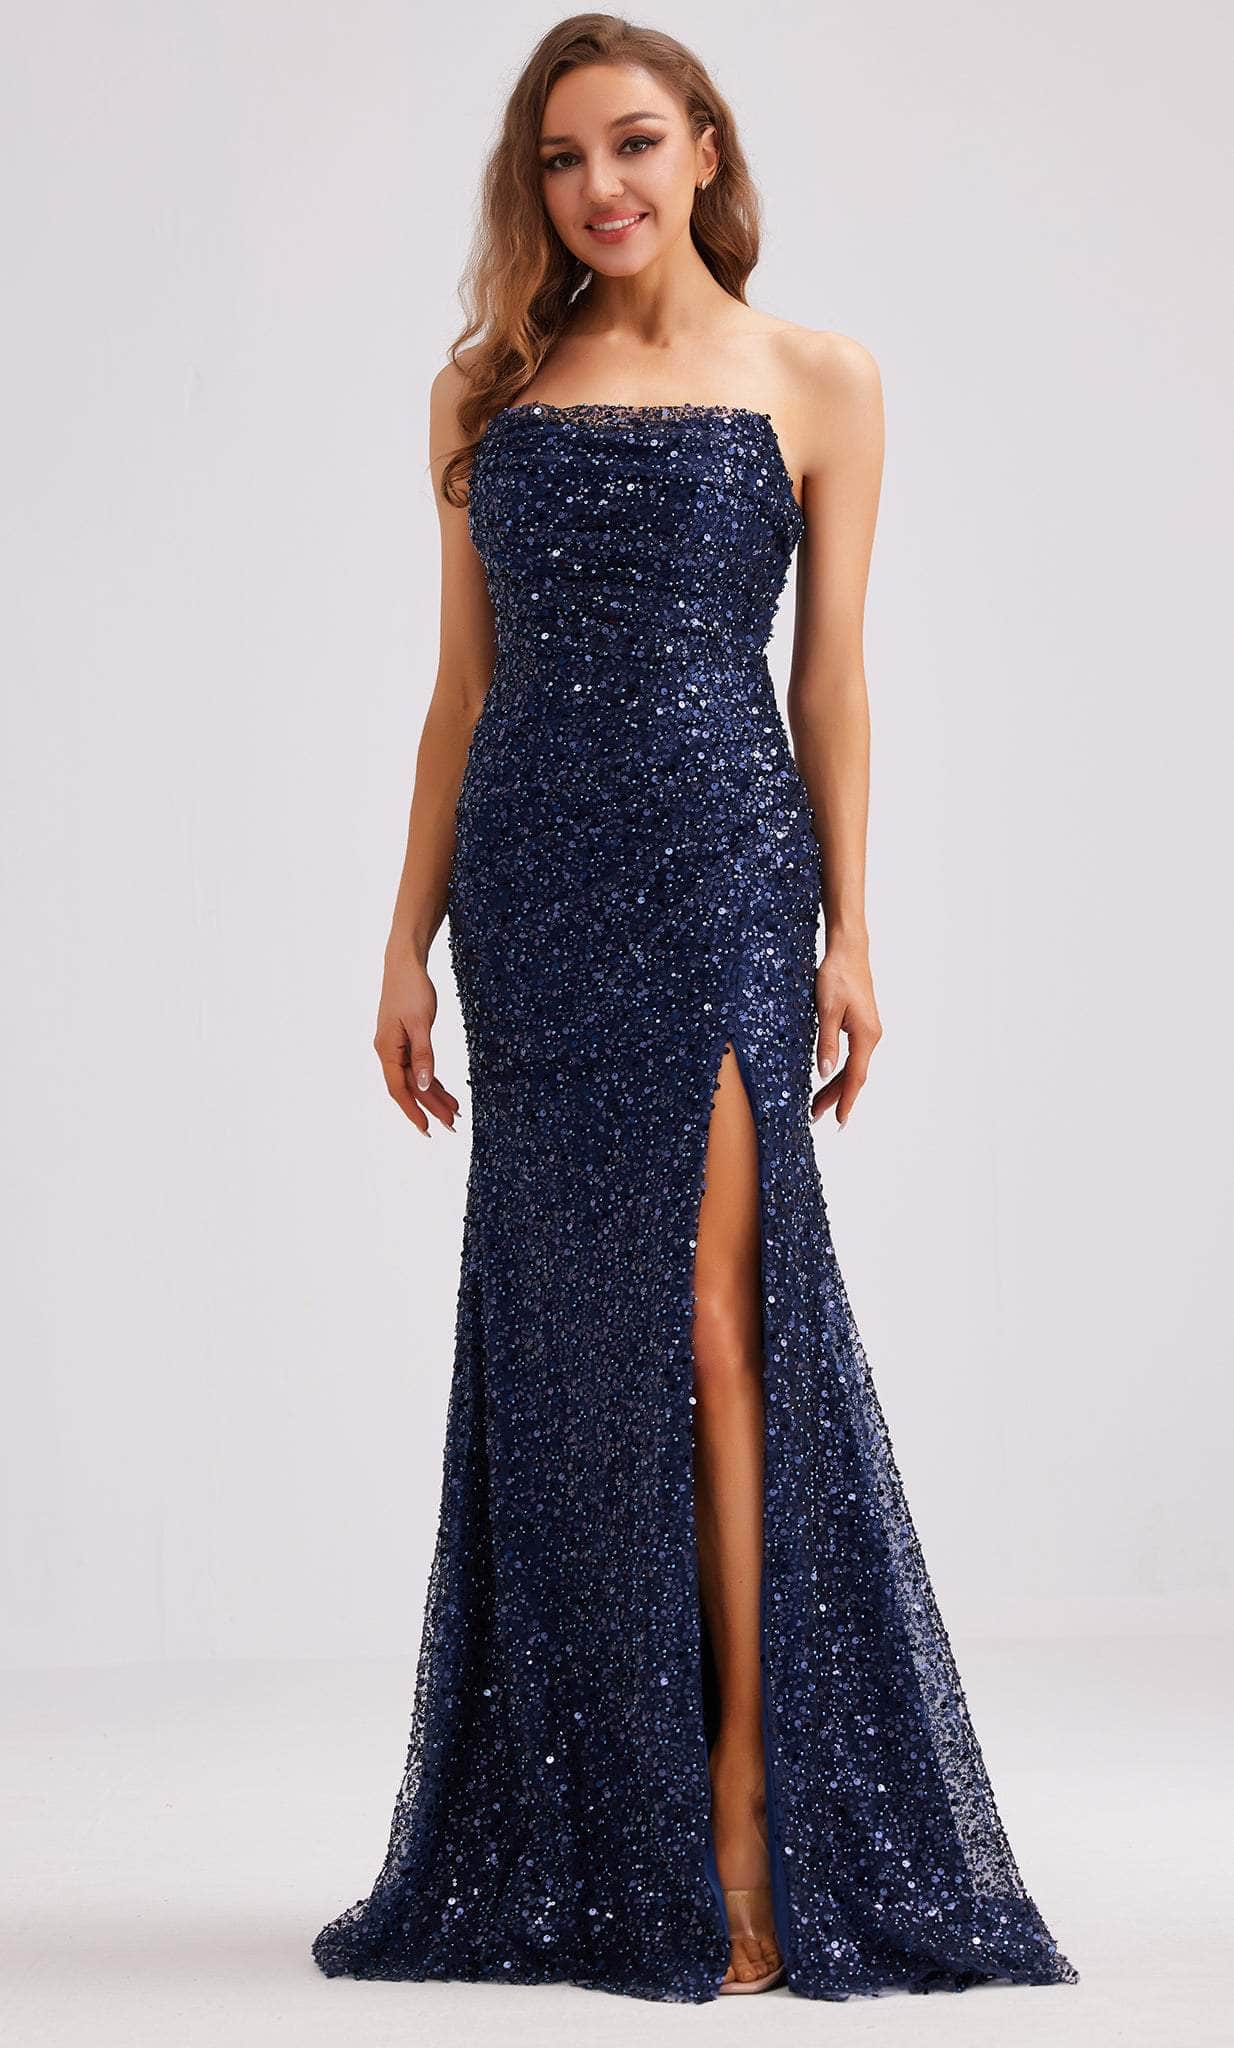 J'Adore Dresses J23020 - Draped Sequin Evening Dress with Slit Special Occasion Dress 2 / Navy